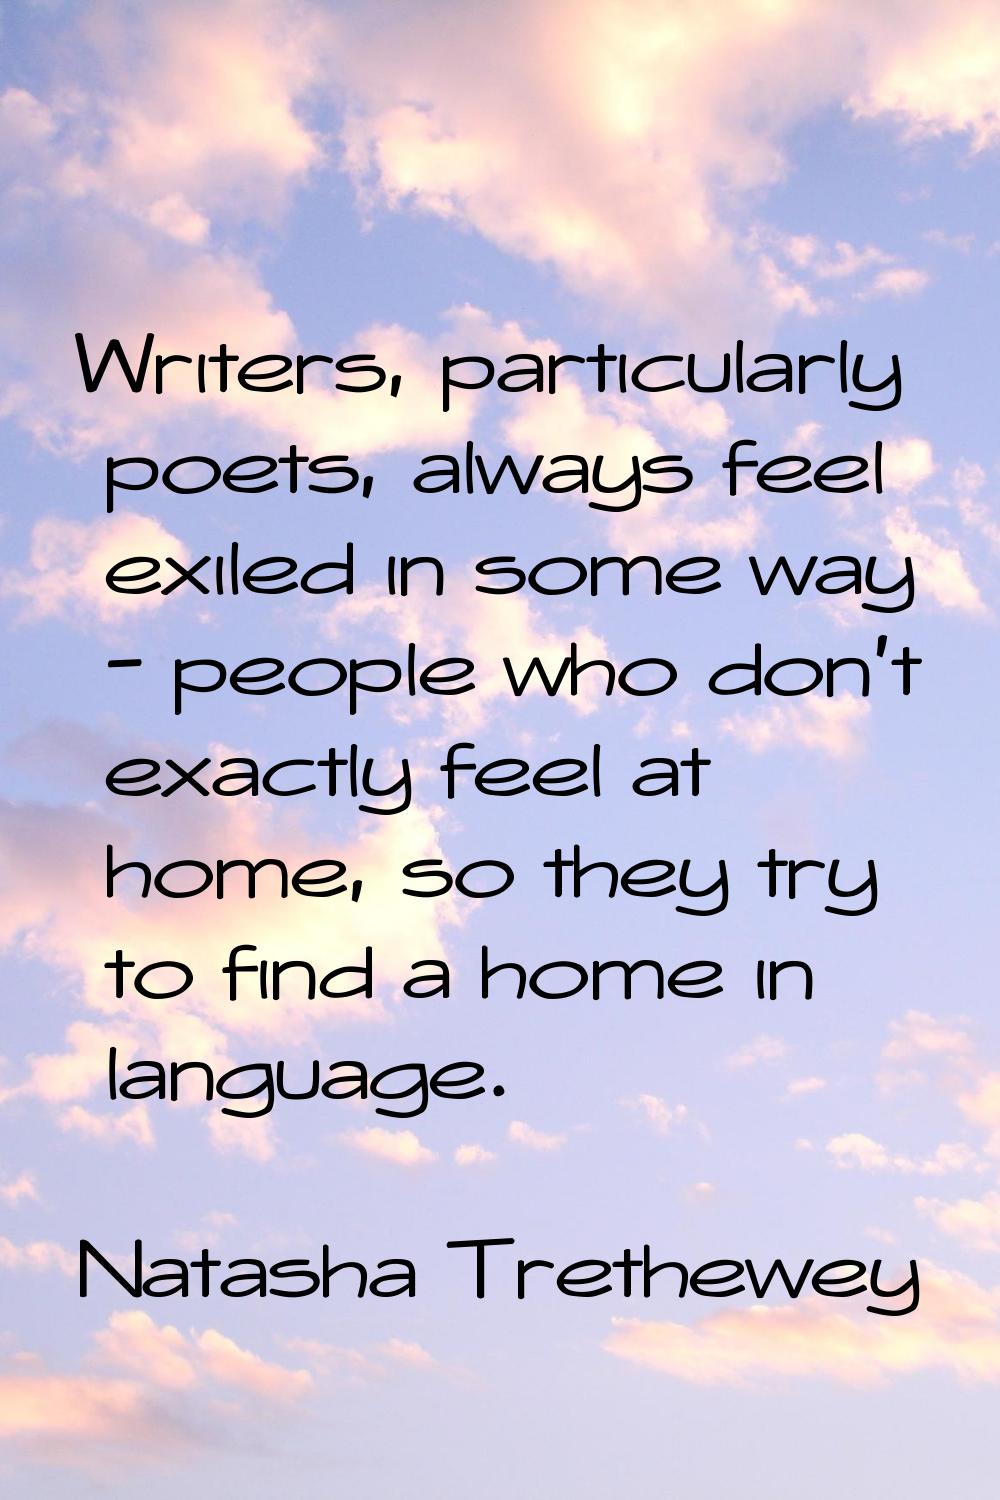 Writers, particularly poets, always feel exiled in some way - people who don't exactly feel at home